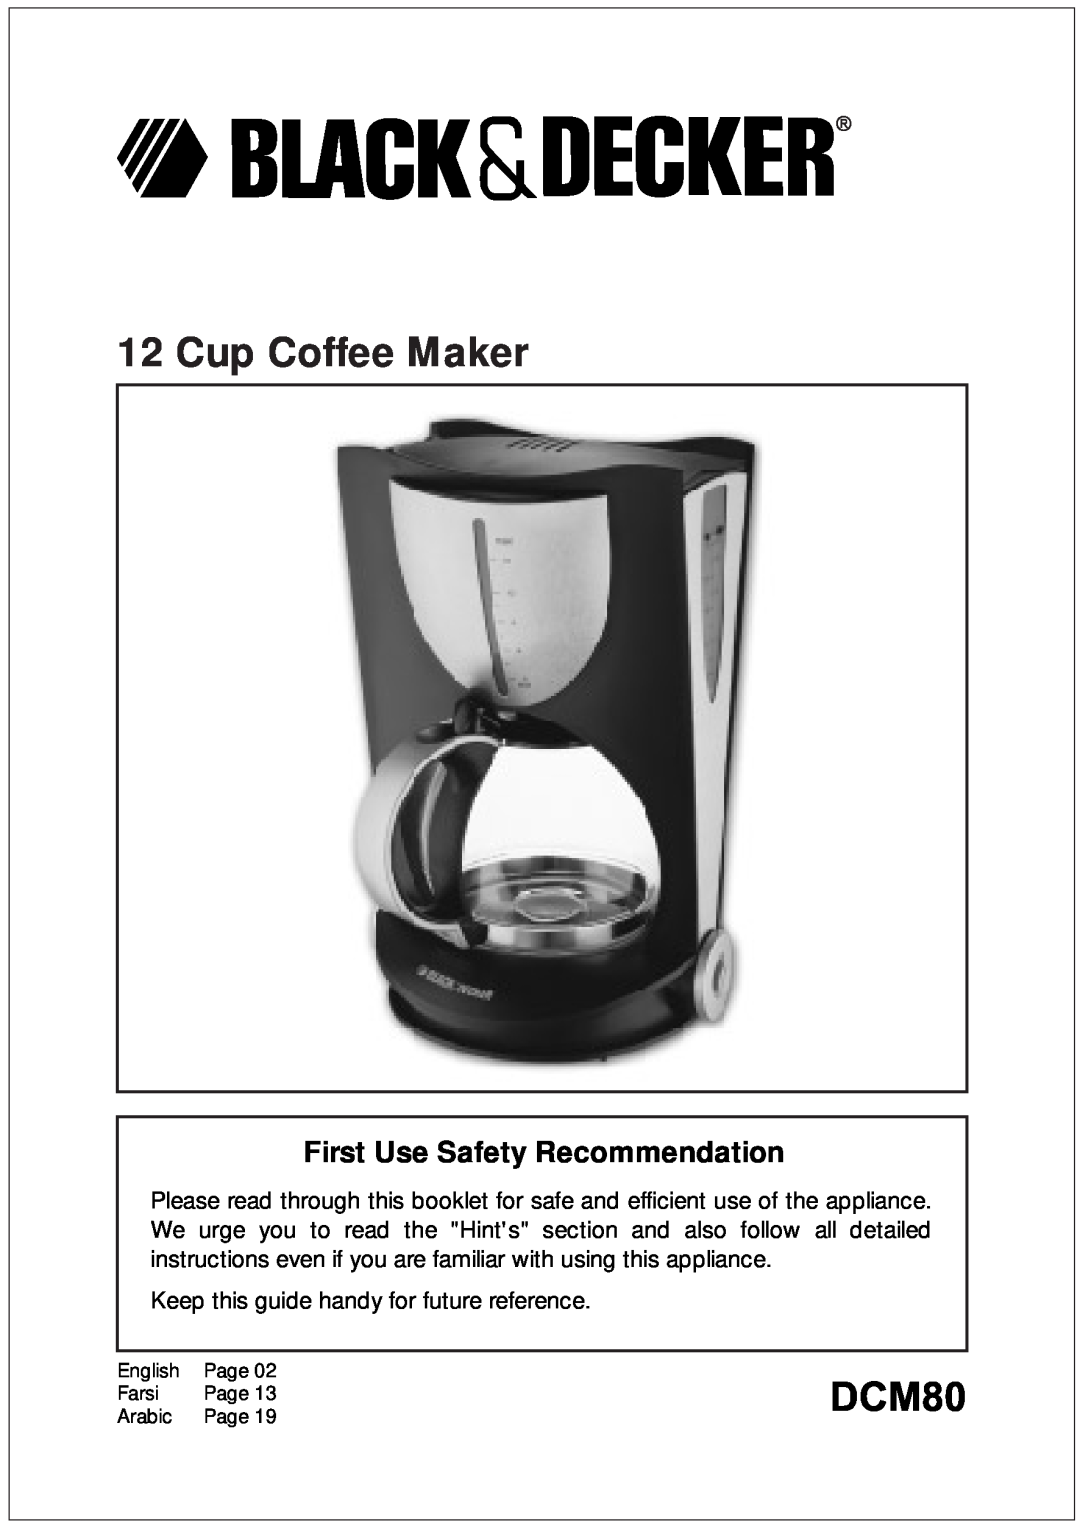 Black & Decker DCM80 manual First Use Safety Recommendation, Keep this guide handy for future reference, Cup Coffee Maker 